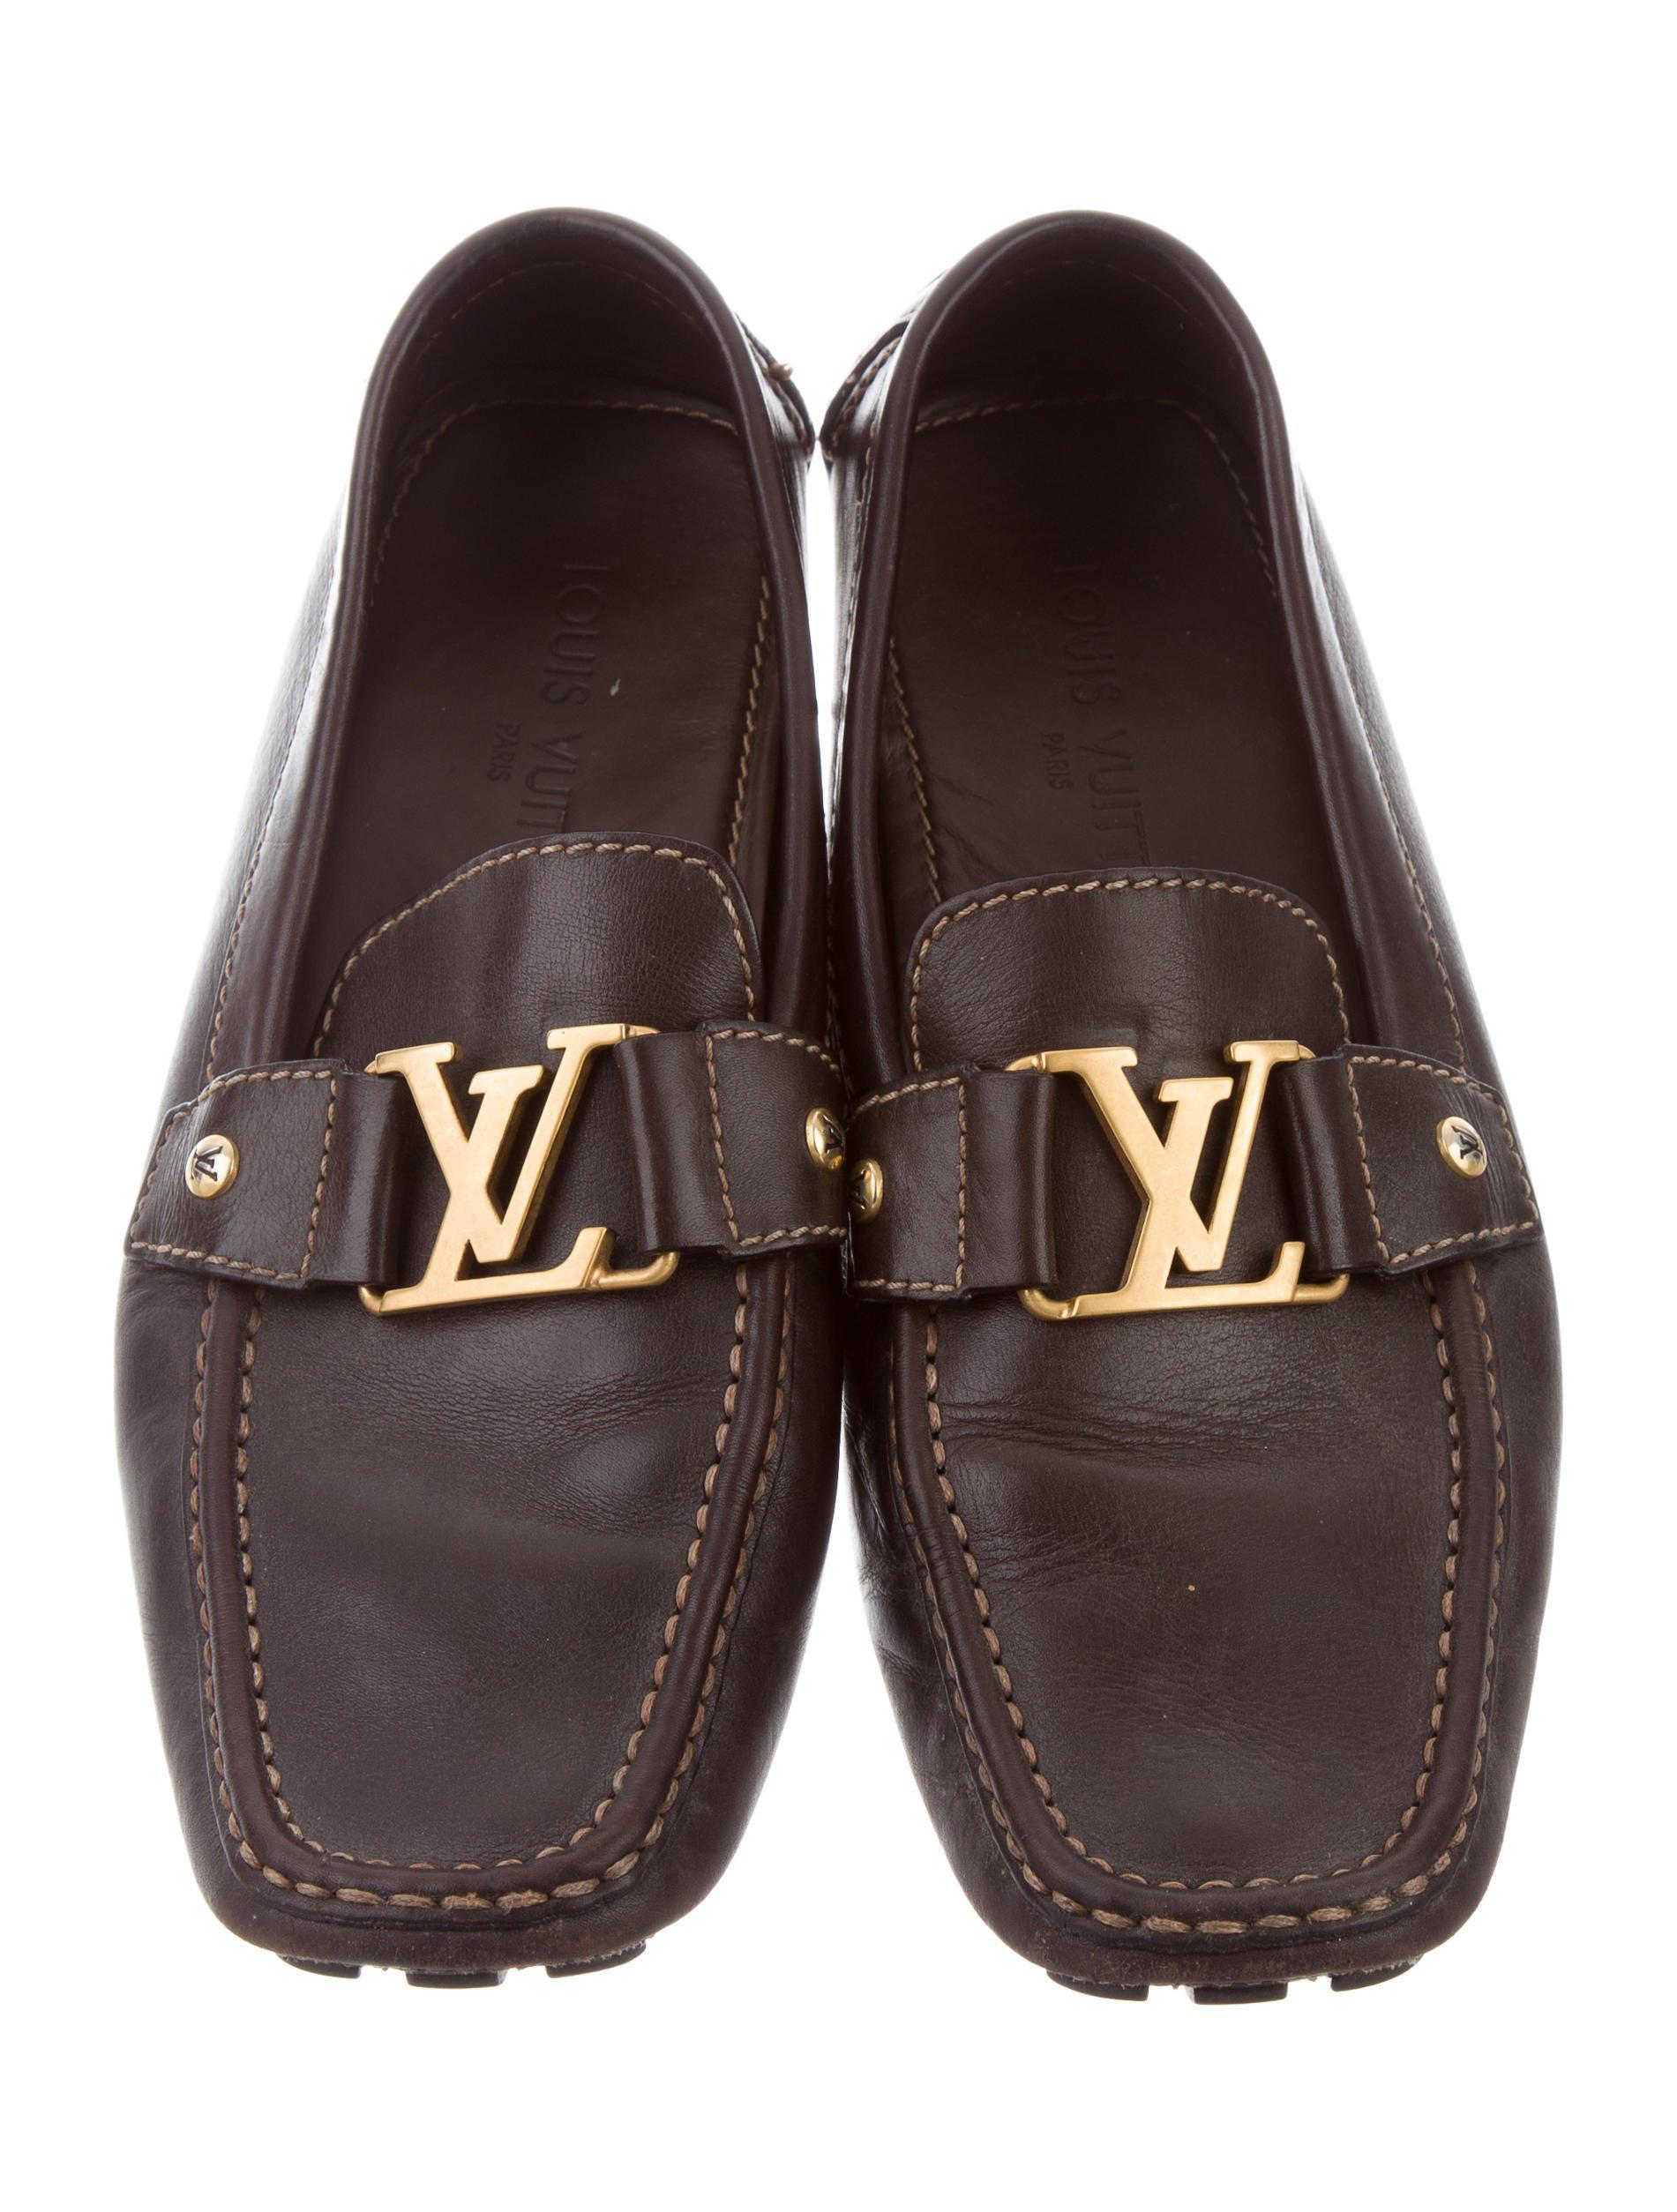 Lyst - Louis Vuitton Monte Carlo Initiales Driving Loafers Brown in Brown for Men